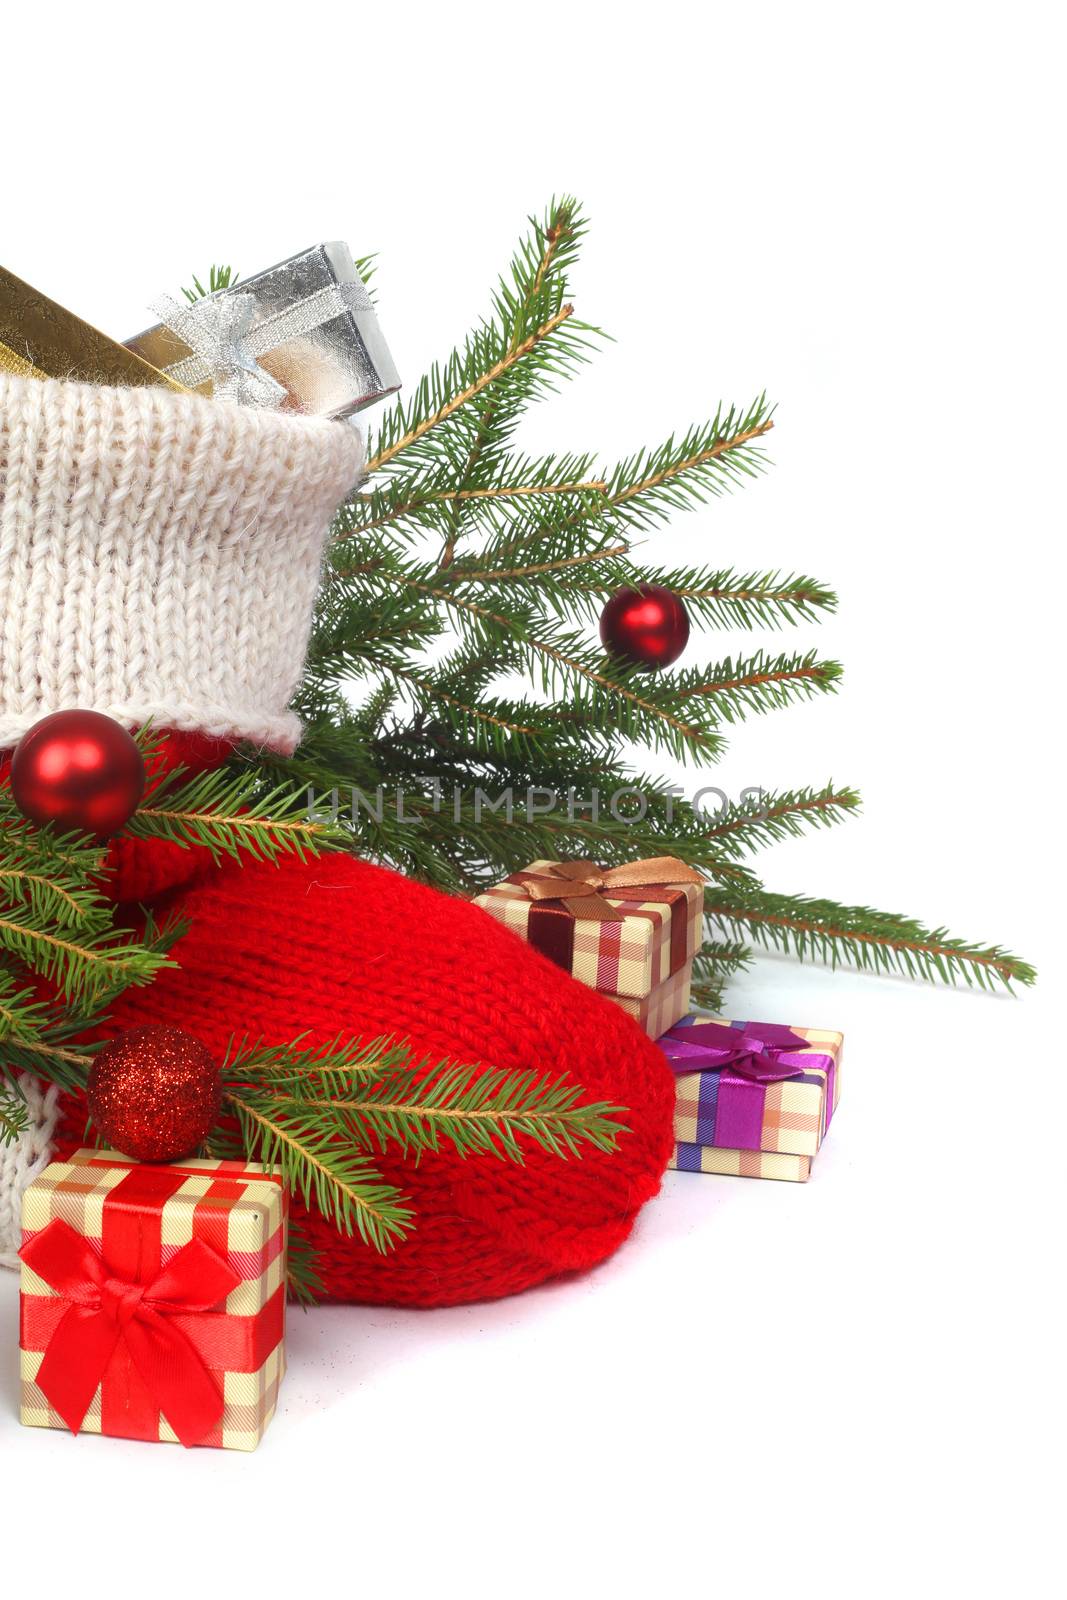 Red Christmas sock with gifts and decorated fir branch isolated on white background